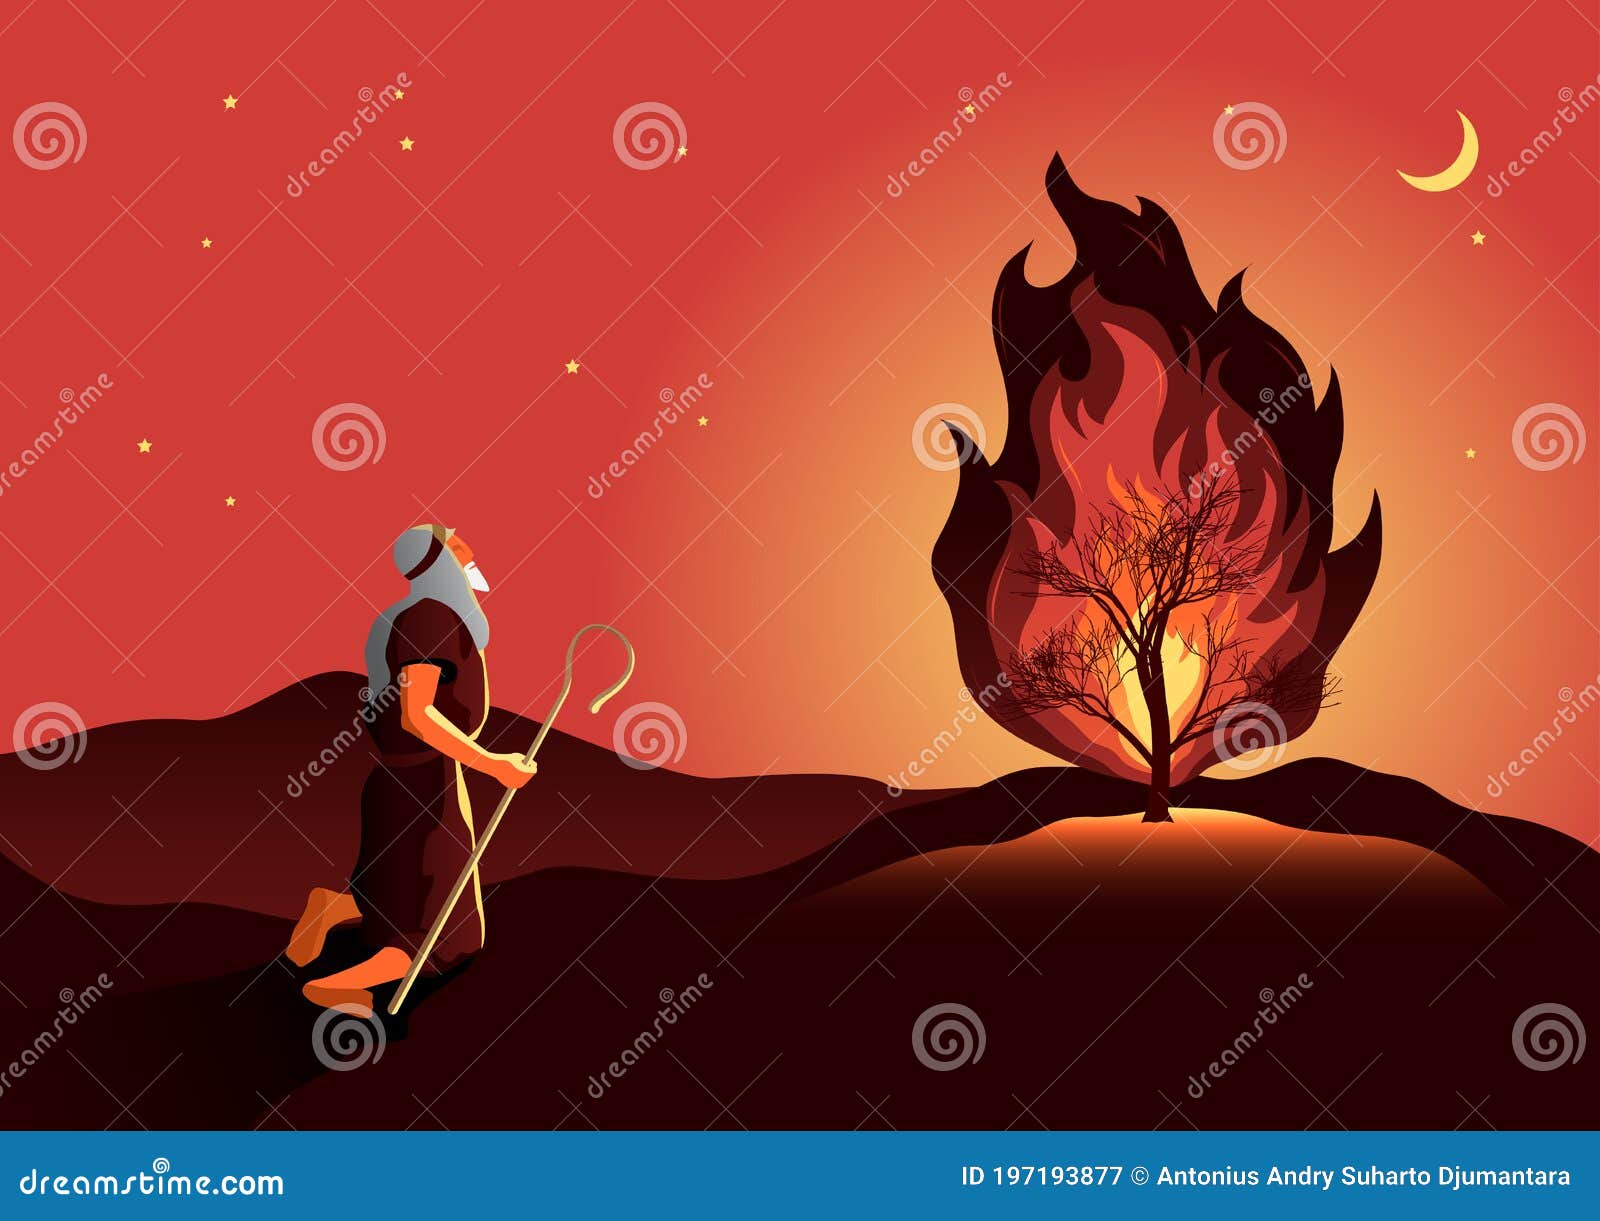 Moses and the burning bush stock vector. Illustration of religion ...